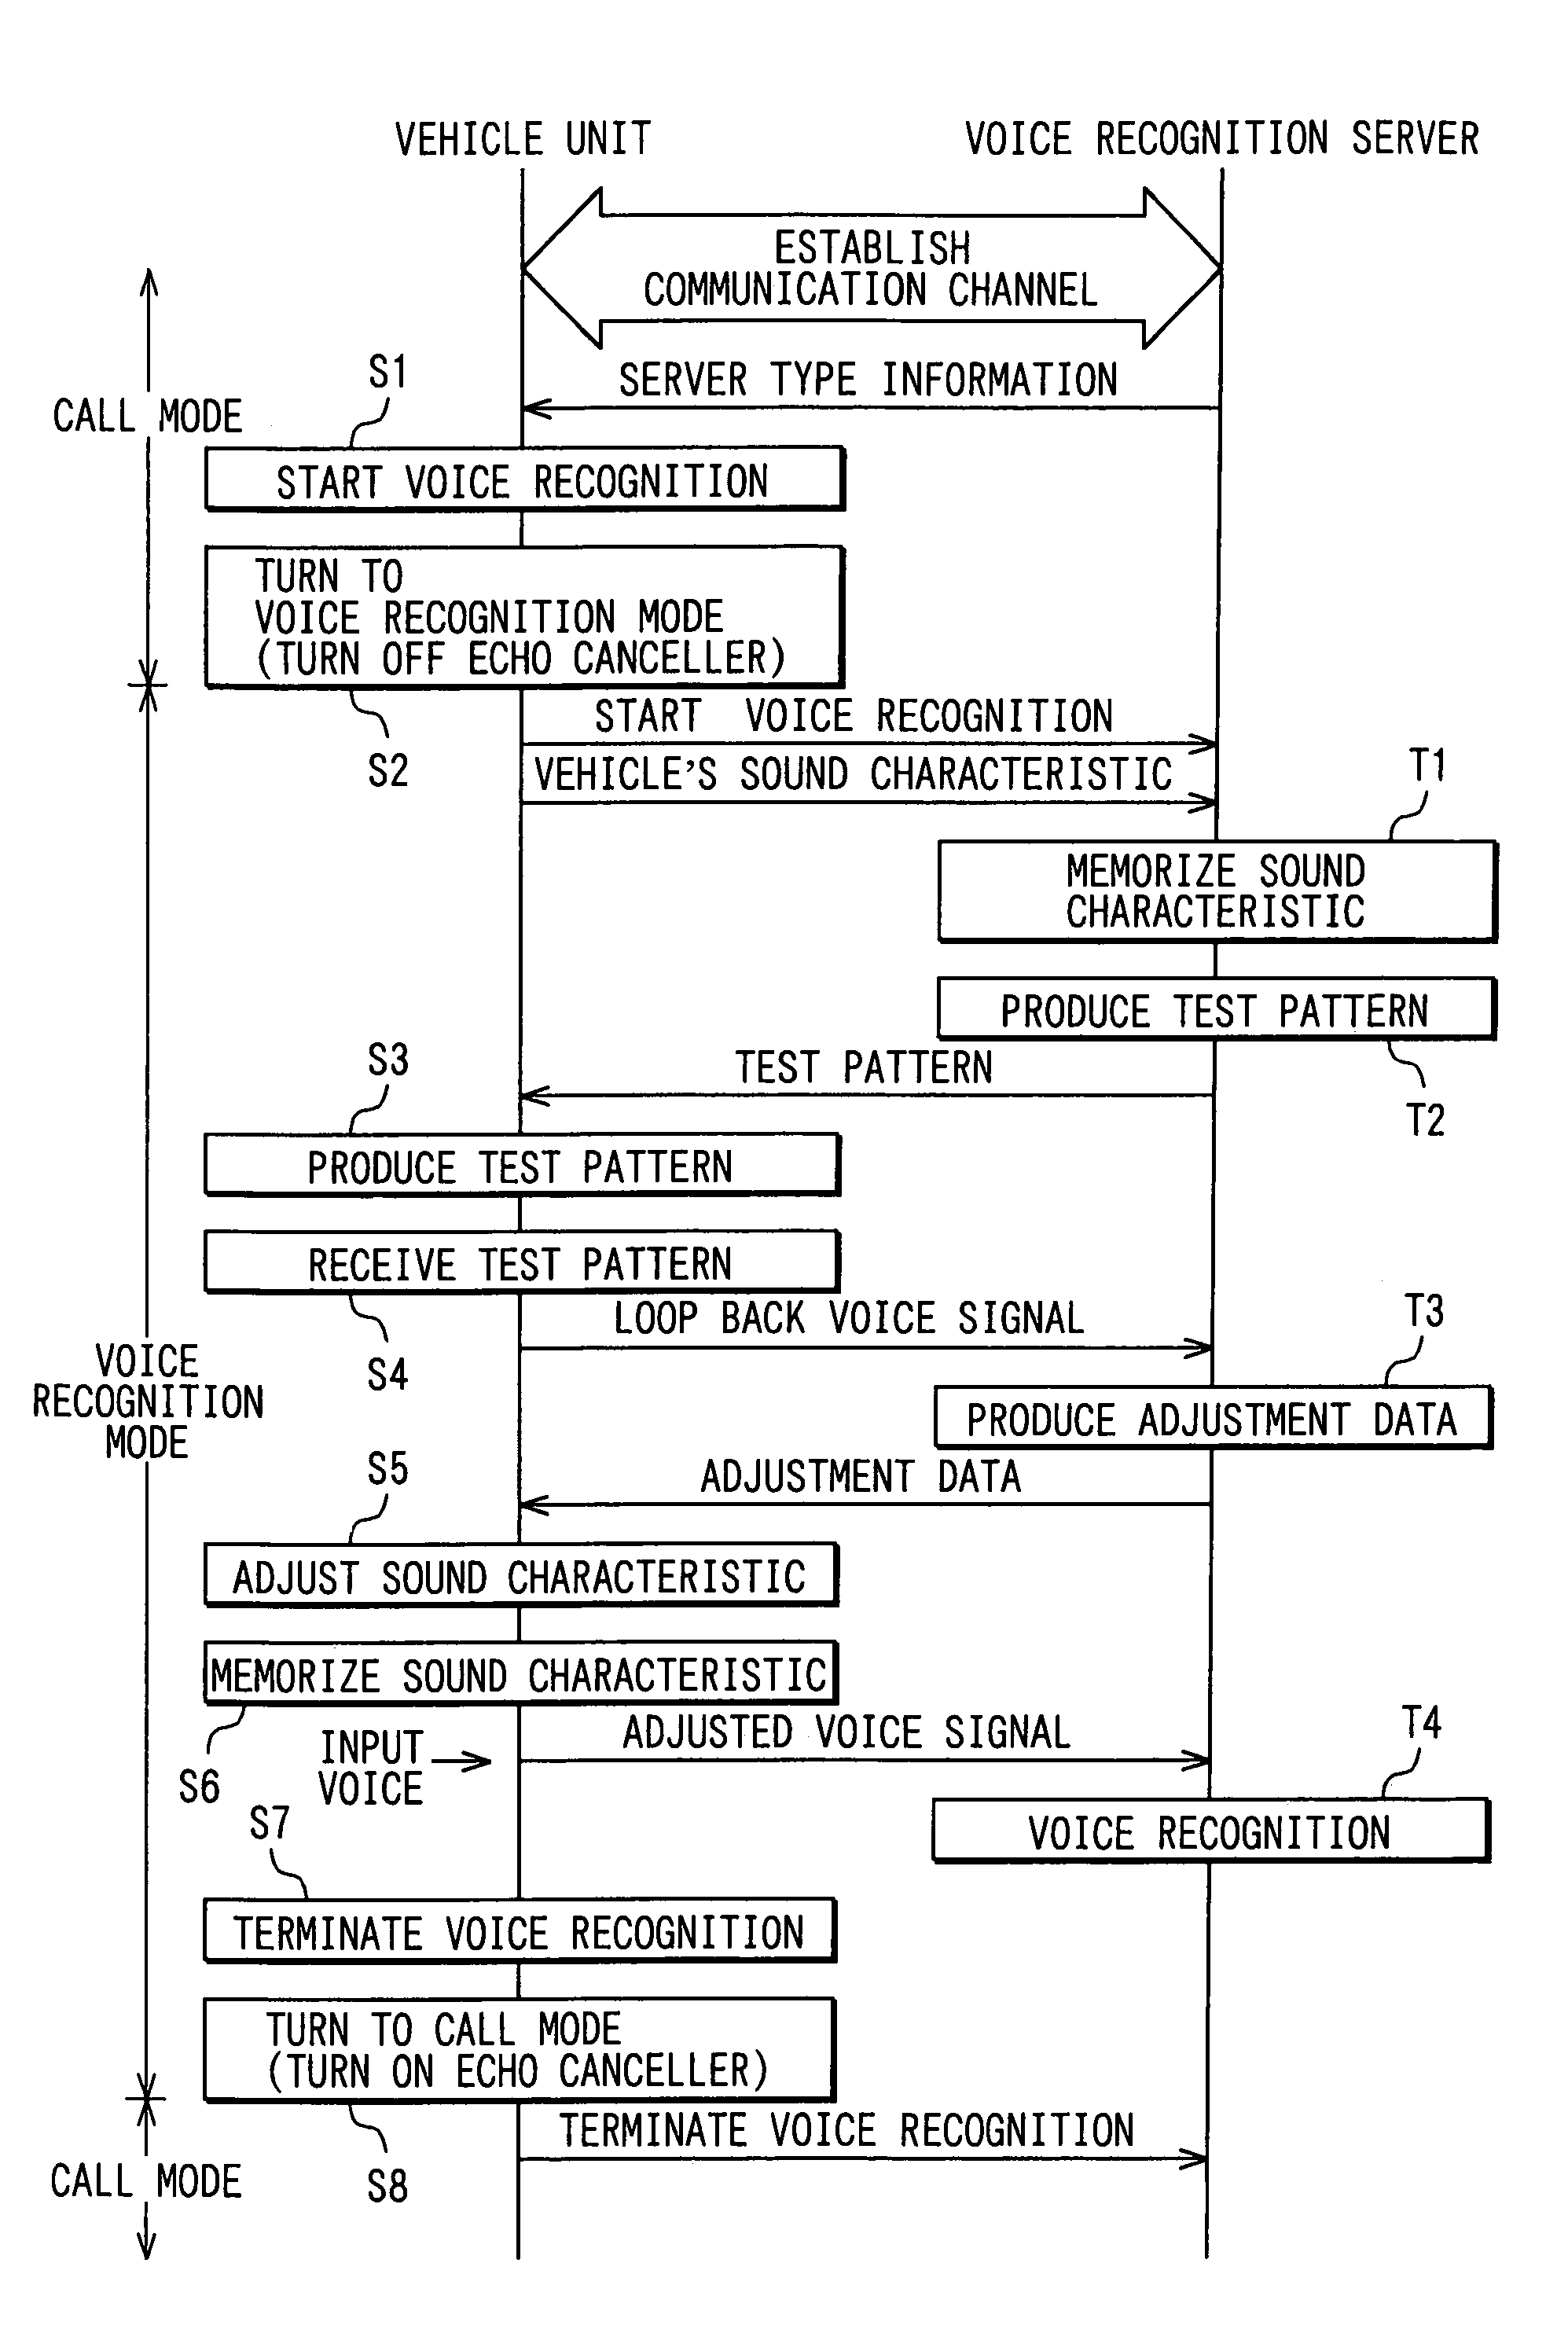 Adjusting sound characteristic of a communication network using test signal prior to providing communication to speech recognition server